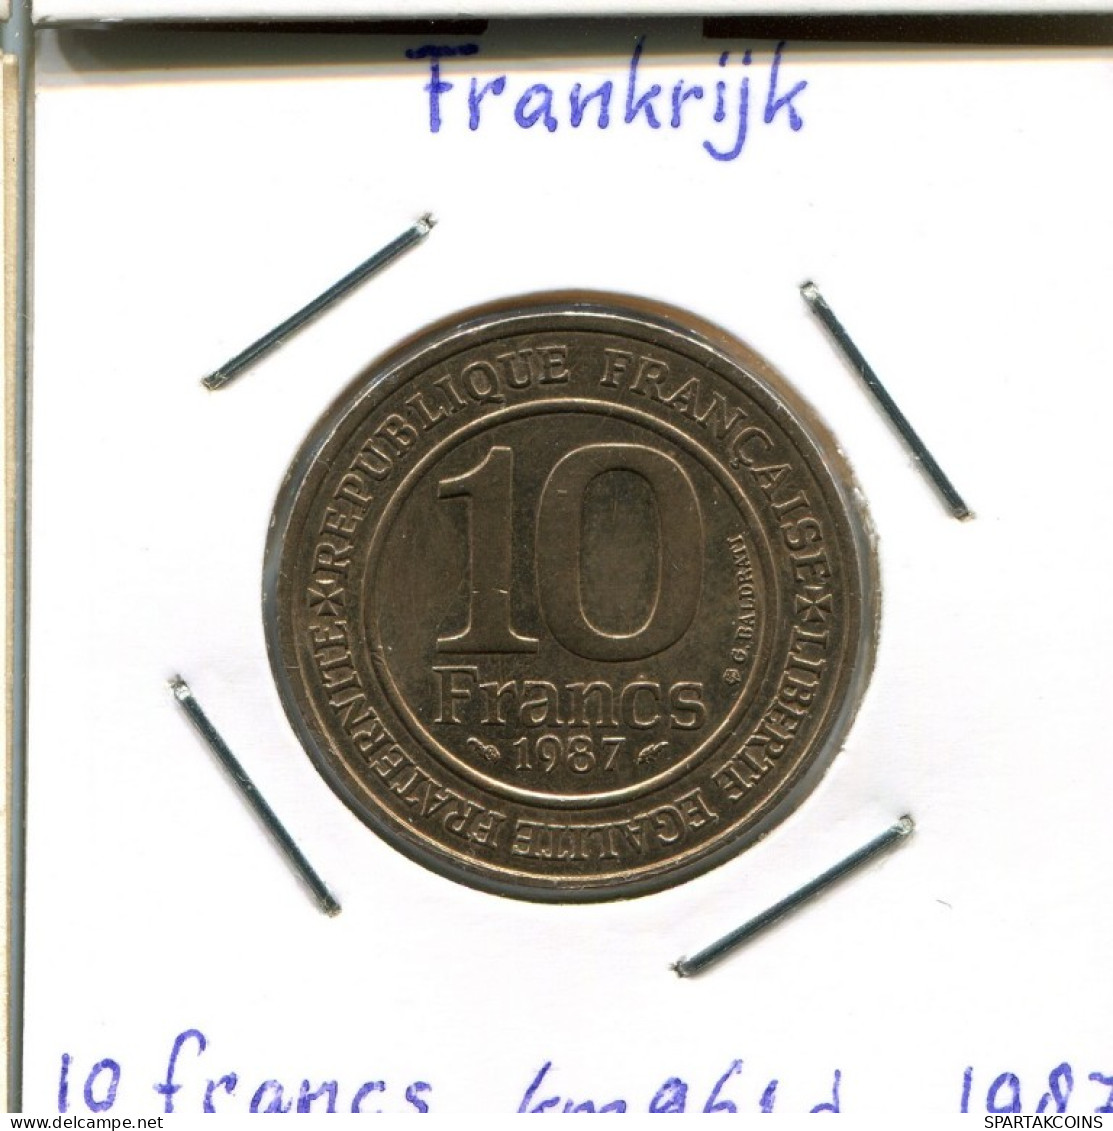 10 FRANCS 1987 FRANCE Coin French Coin #AM424.U.A - 10 Francs